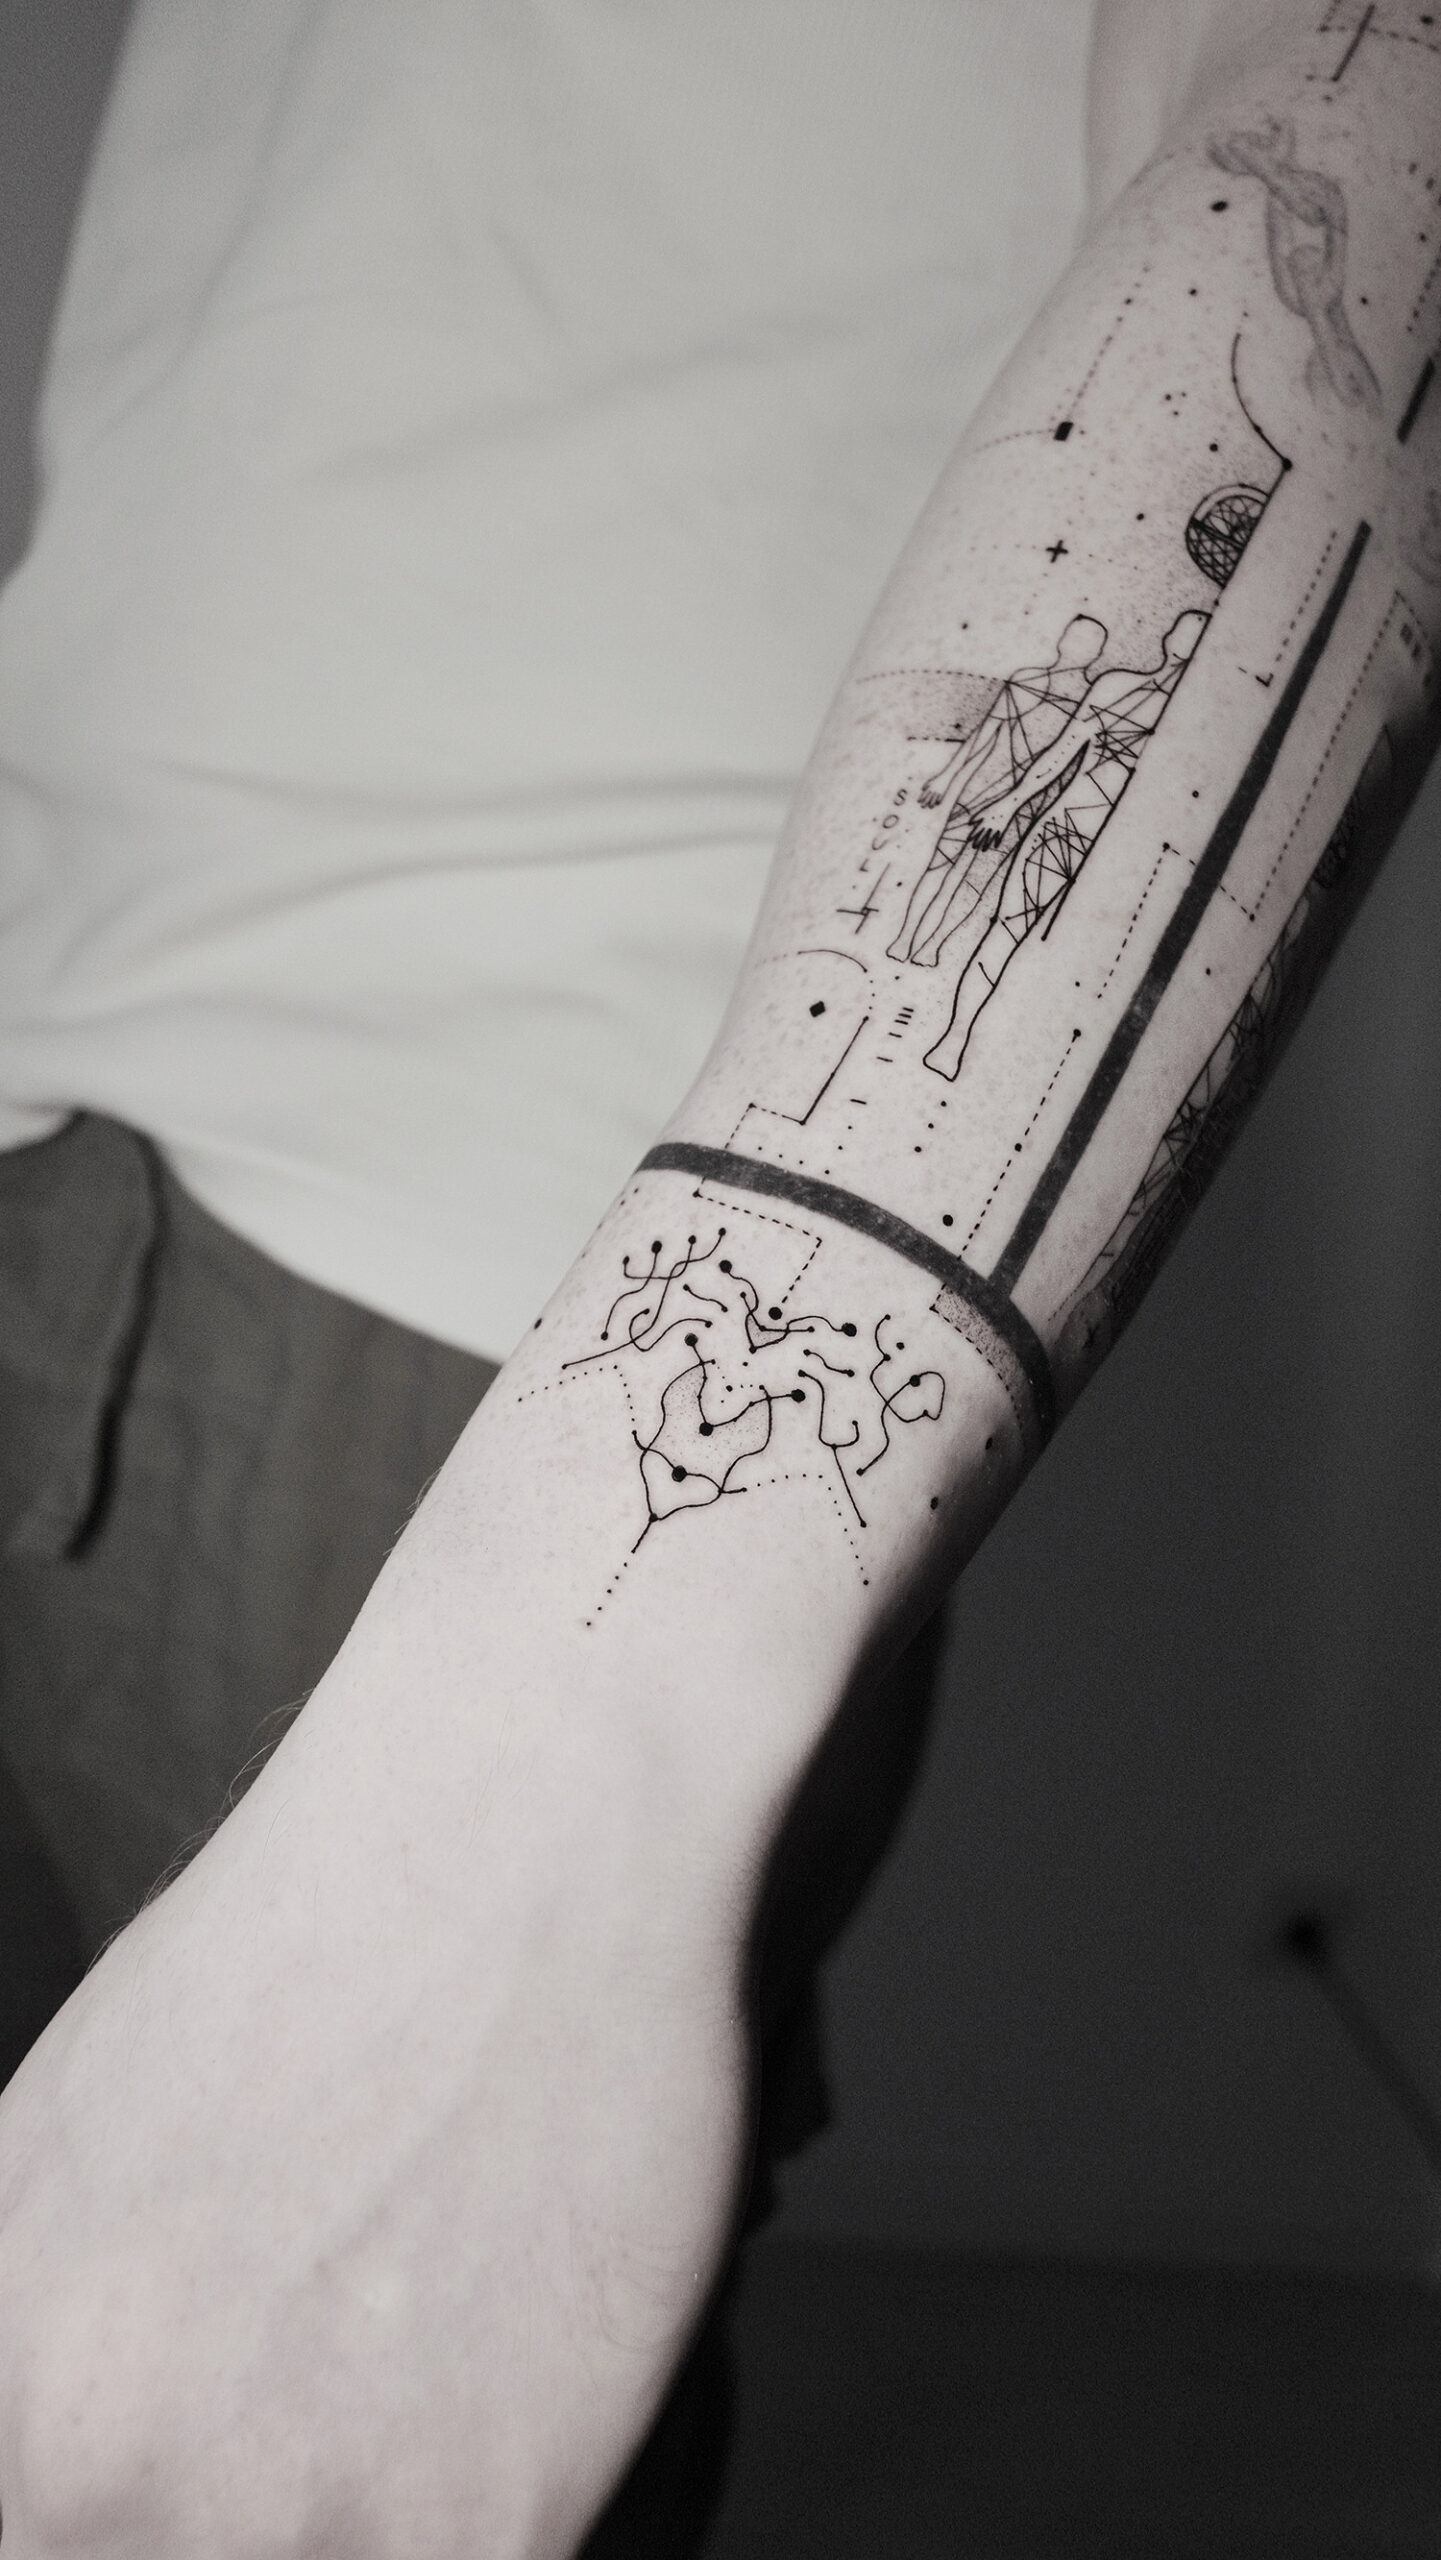 souls, connection and line art tattoo, black ink